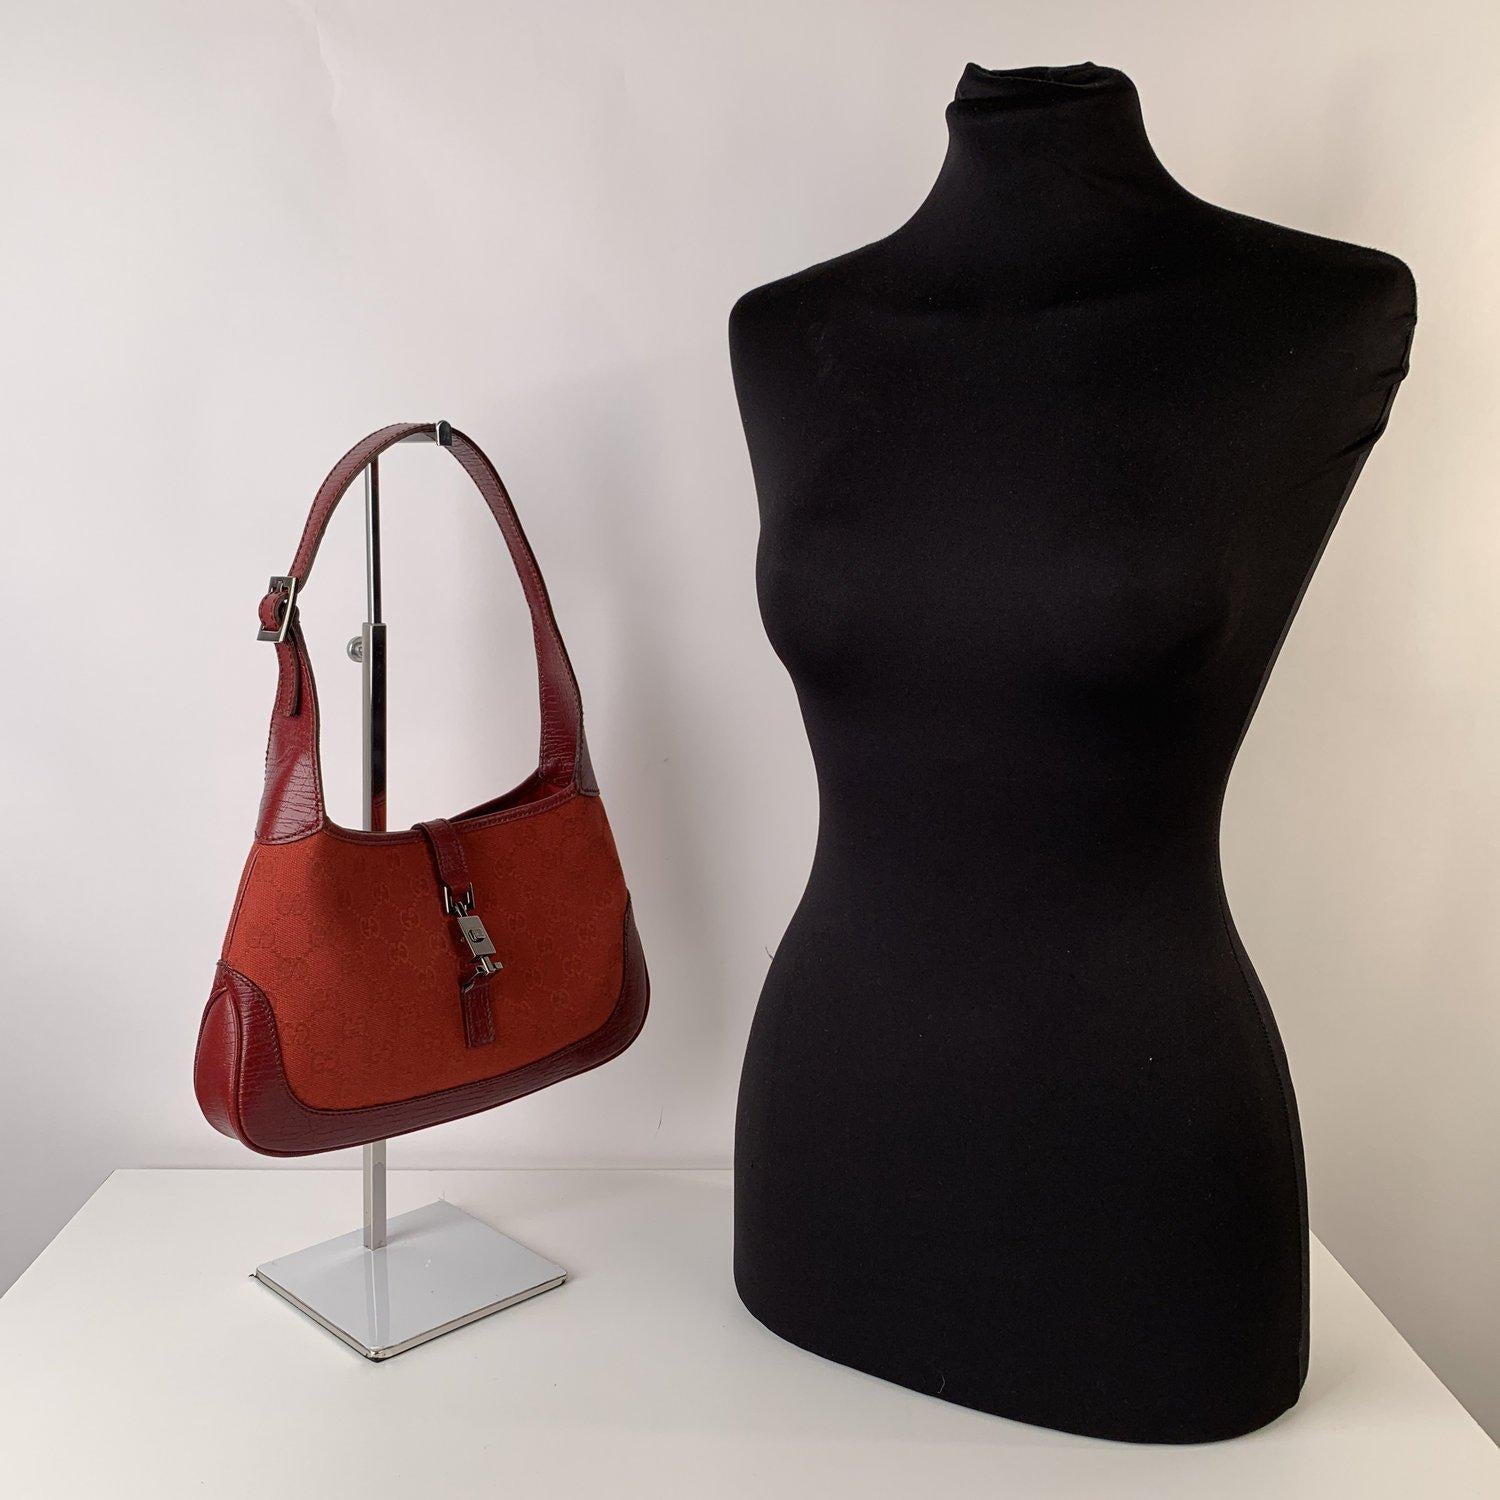 MATERIAL: Canvas, Leather COLOR: Red MODEL: Jackie Bag GENDER: Women SIZE: Small Condition A :EXCELLENT CONDITION - Used once or twice. Looks mint. Imperceptible signs of wear may be present due to storage - Measurements BAG HEIGHT: 7 inches - 17,8